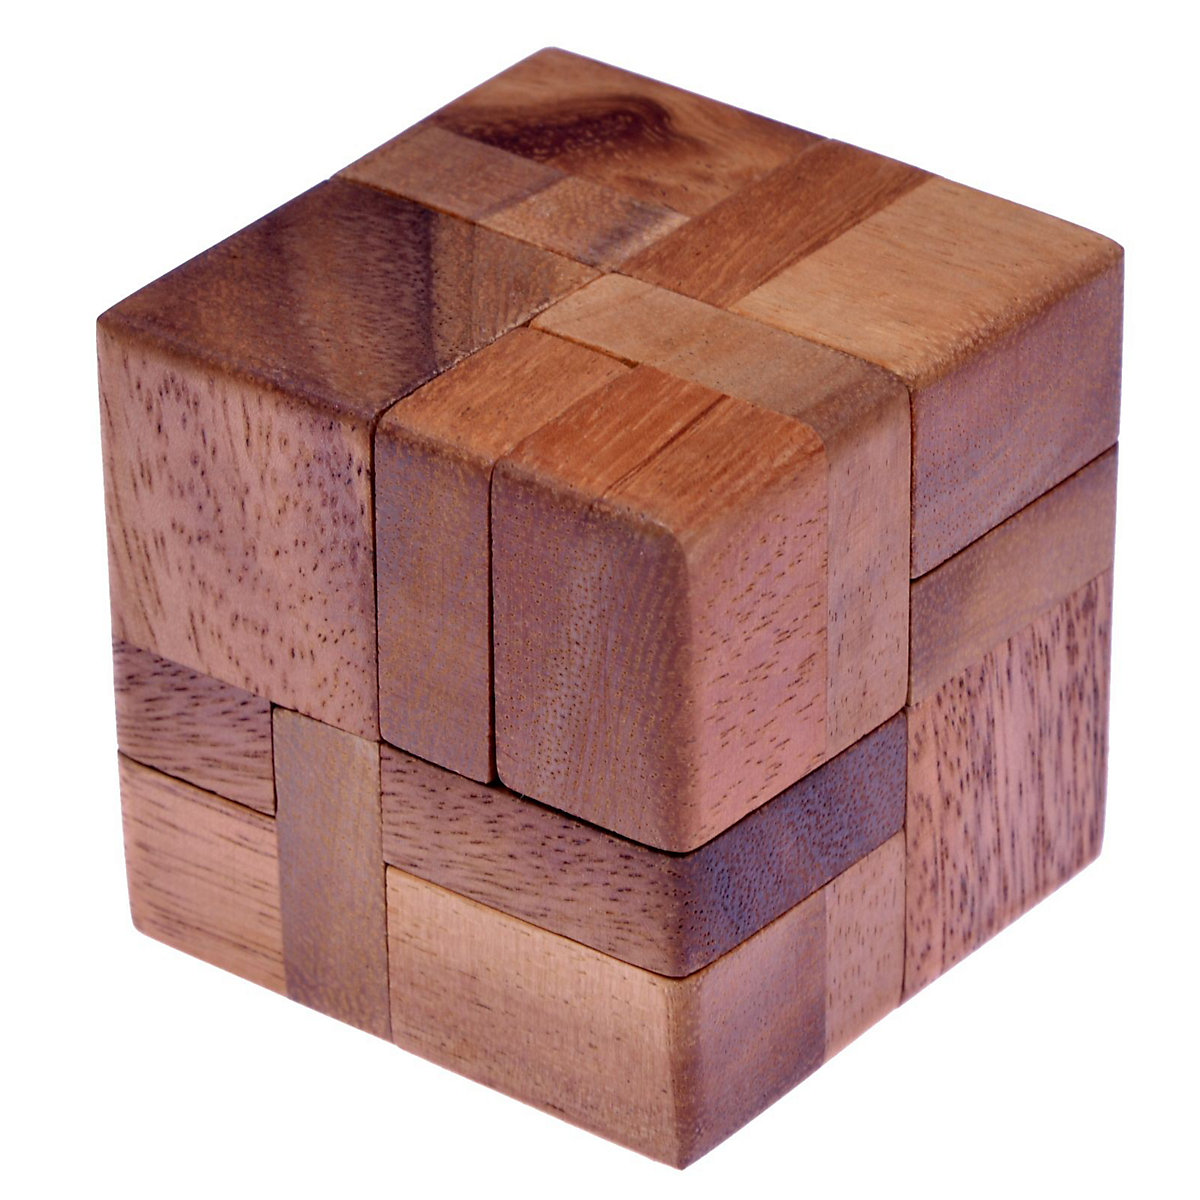 LOGOPLAY 6 Pieces in a Cube 3D Puzzle Knobelspiel aus Holz